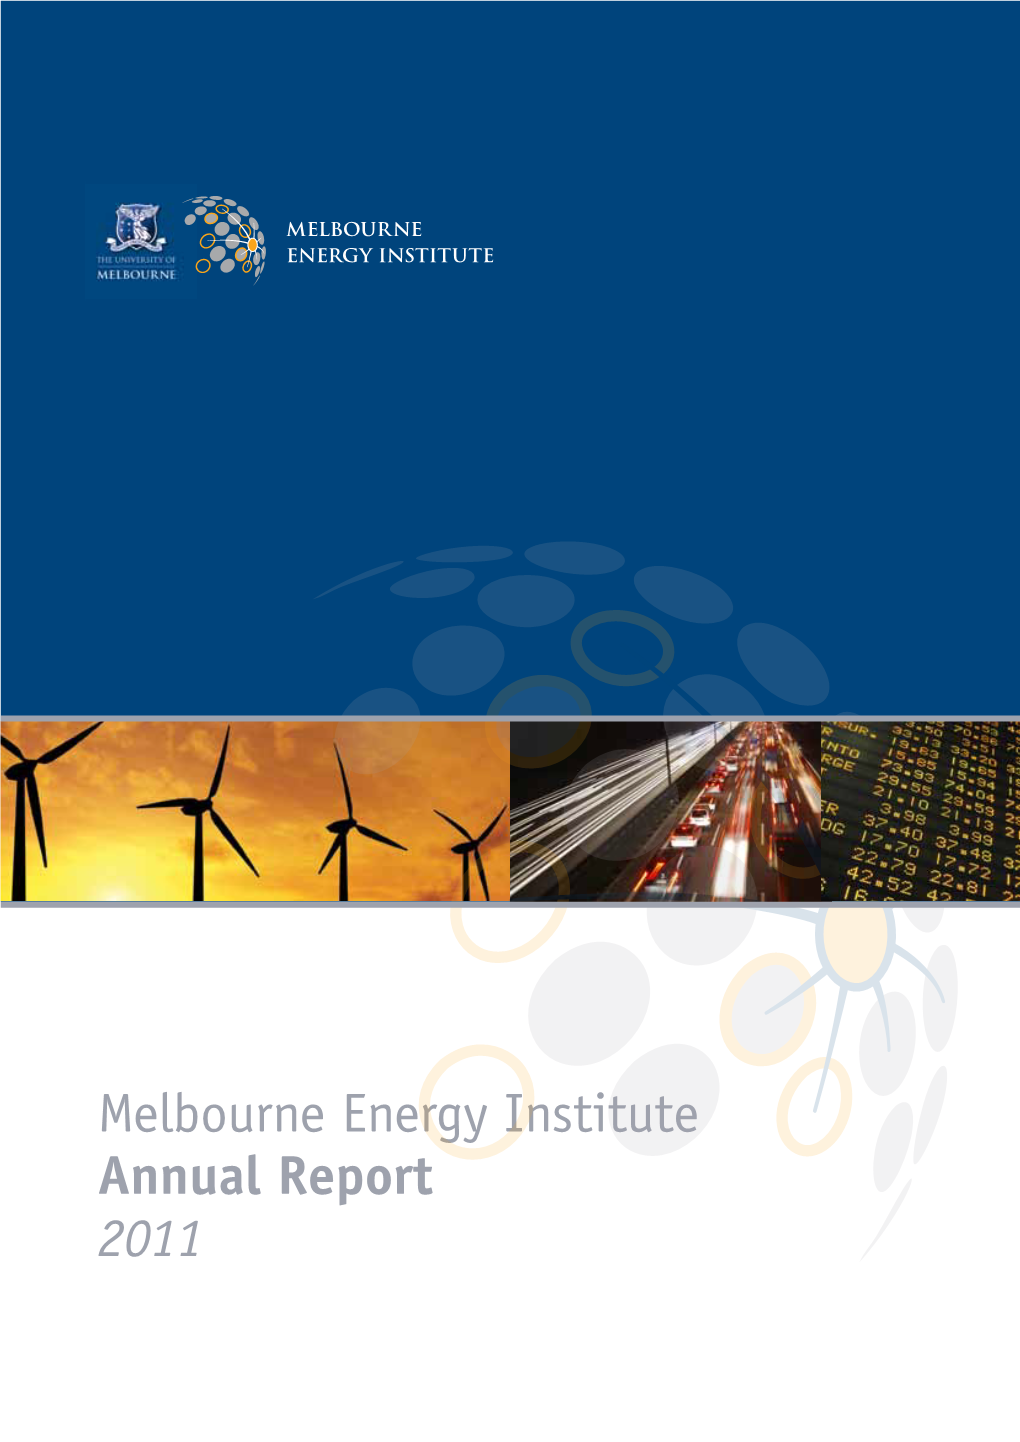 Melbourne Energy Institute Annual Report 2011 © the University of Melbourne